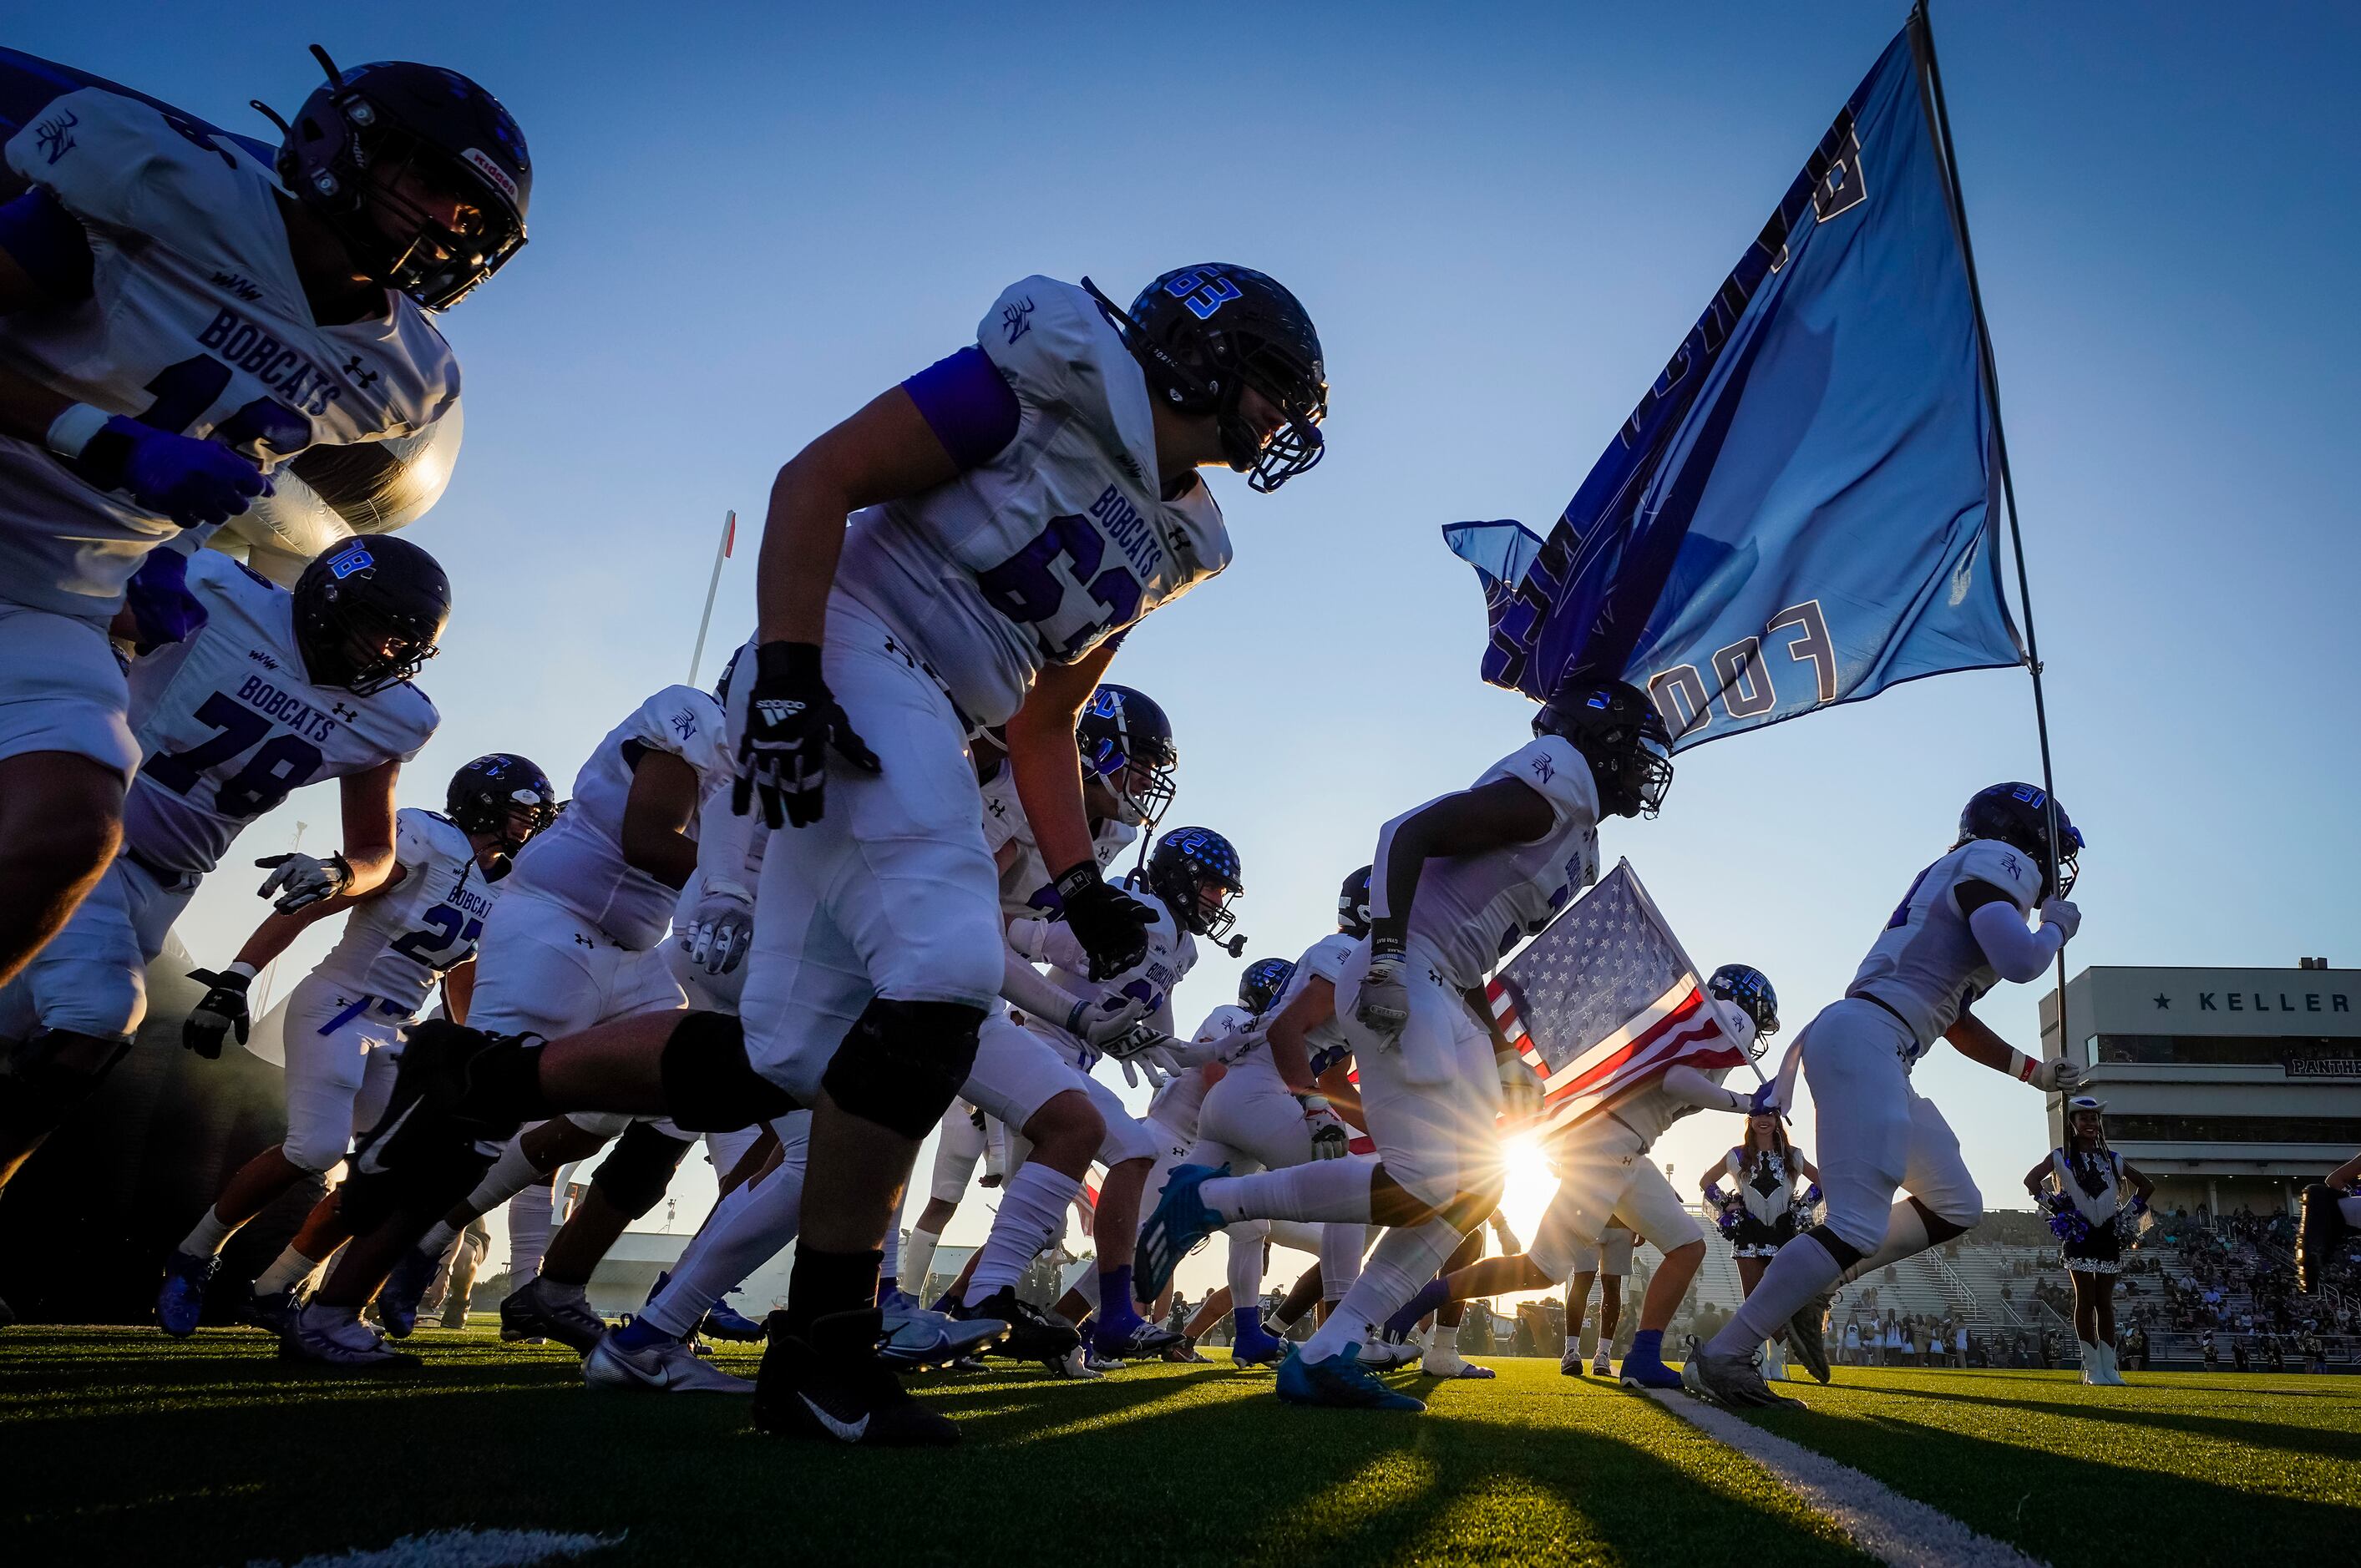 Trophy Club Byron Nelson players take the field to face Keller Fossil Ridge in a high school...